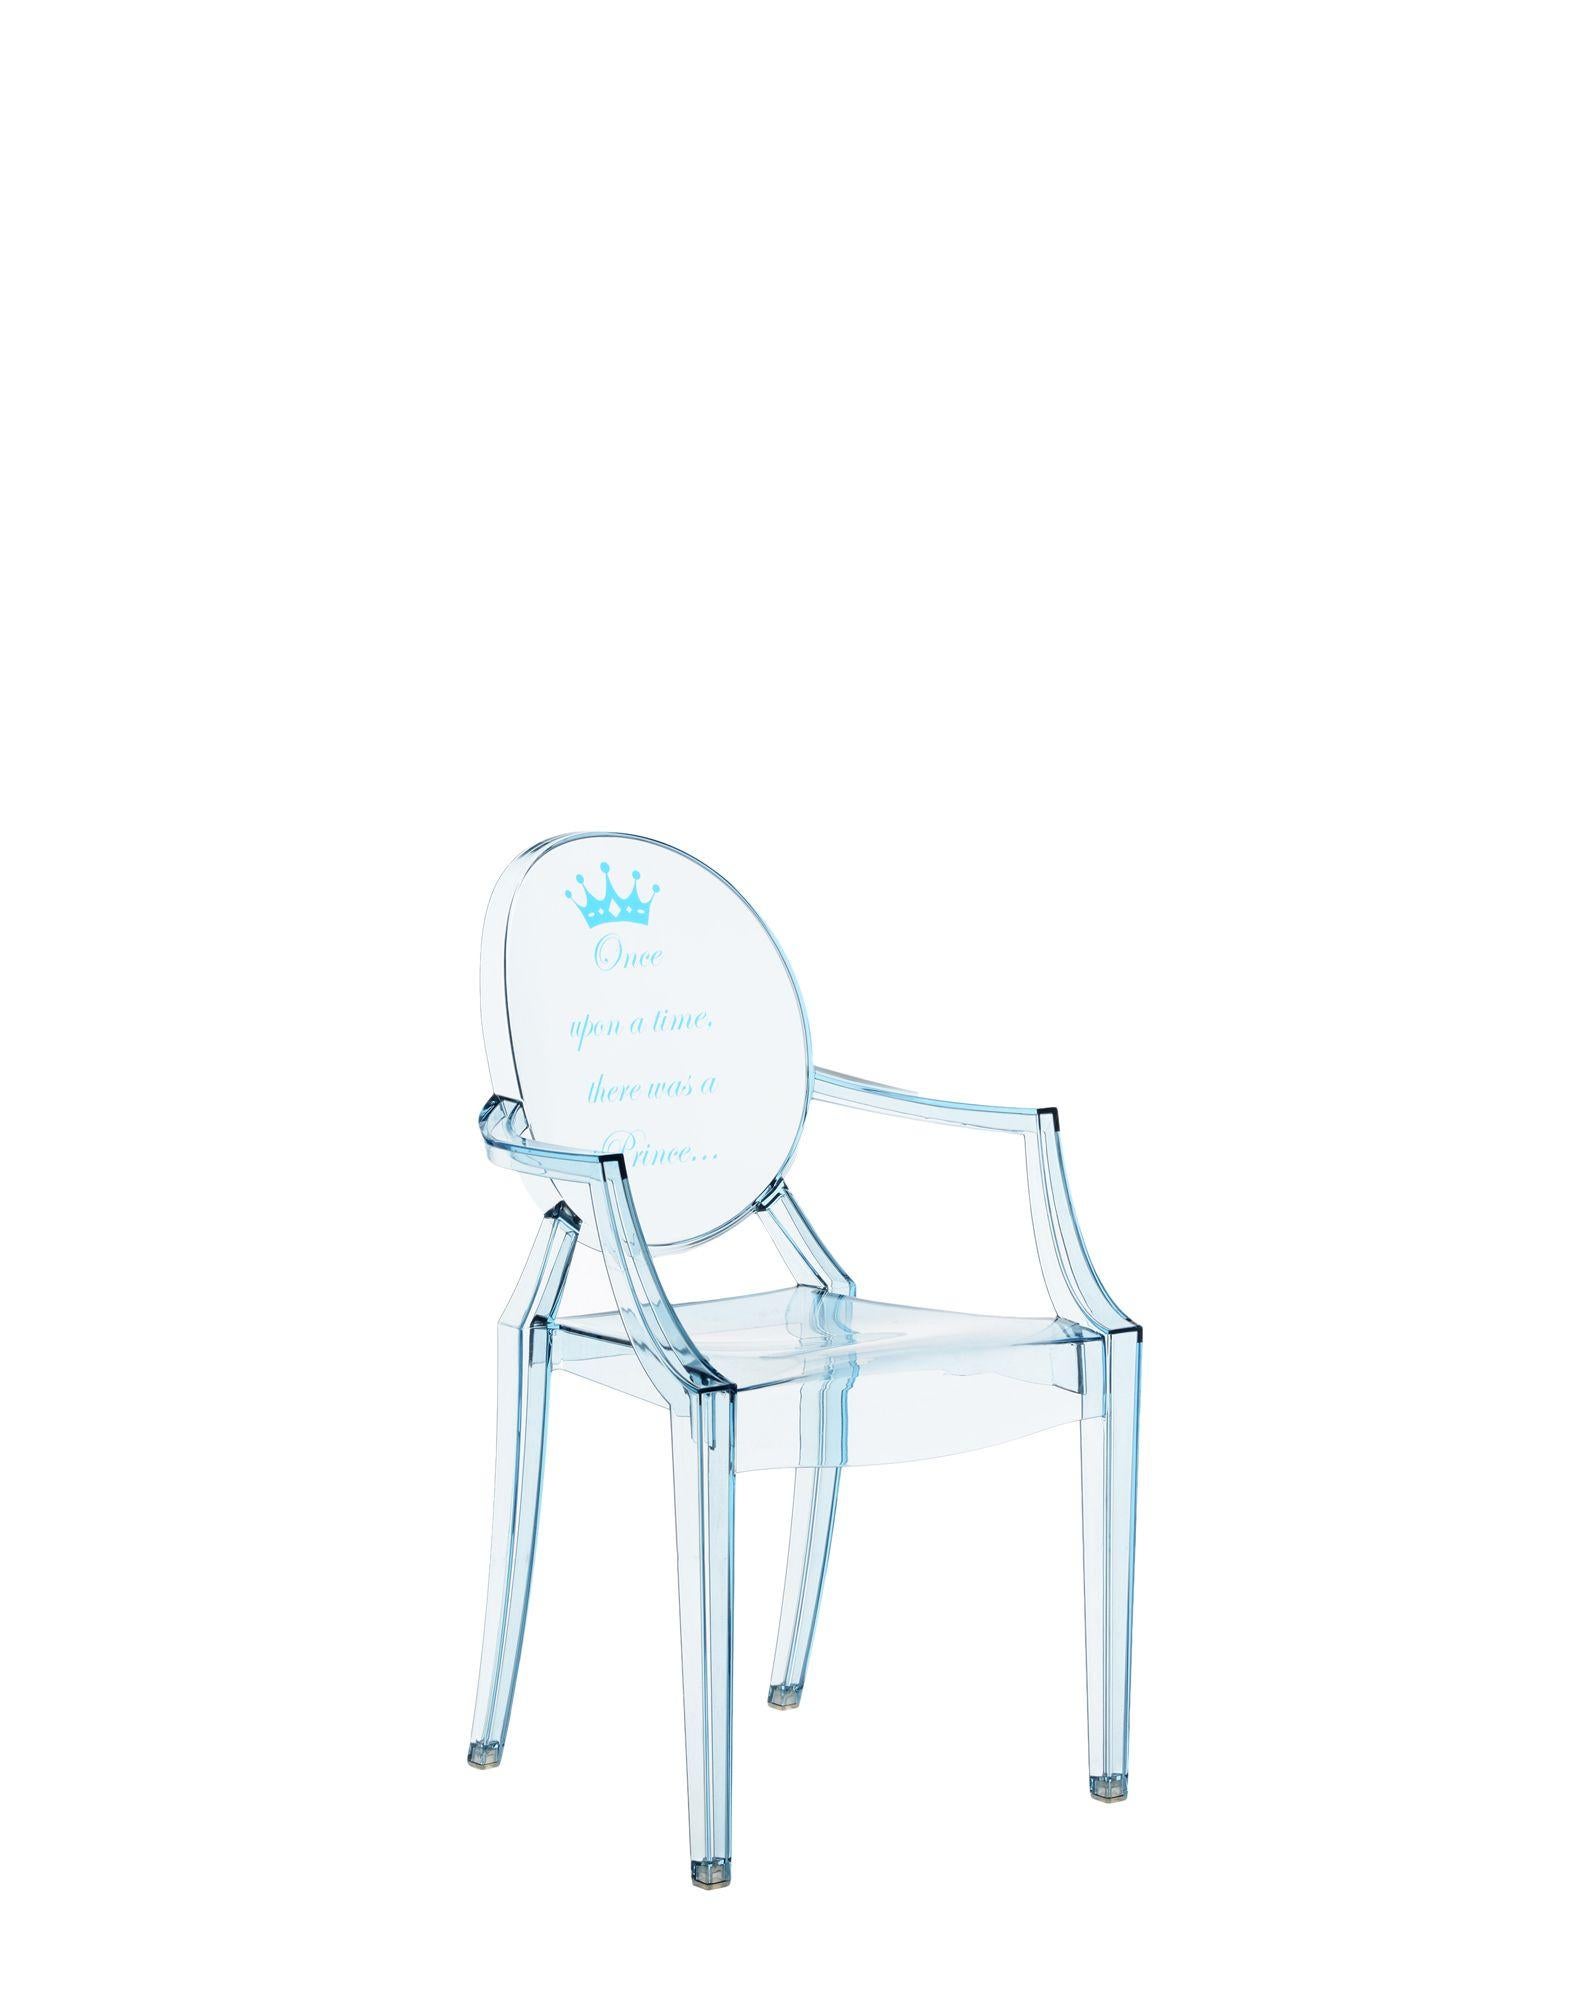 The miniature version of one of the most famous design chairs joins the Kartell Kids line in several new versions. Philippe Starck's Lou Lou Ghost gets new and customizable graphics for the fun world of kids.

Dimensions: height 24.75 in, diameter